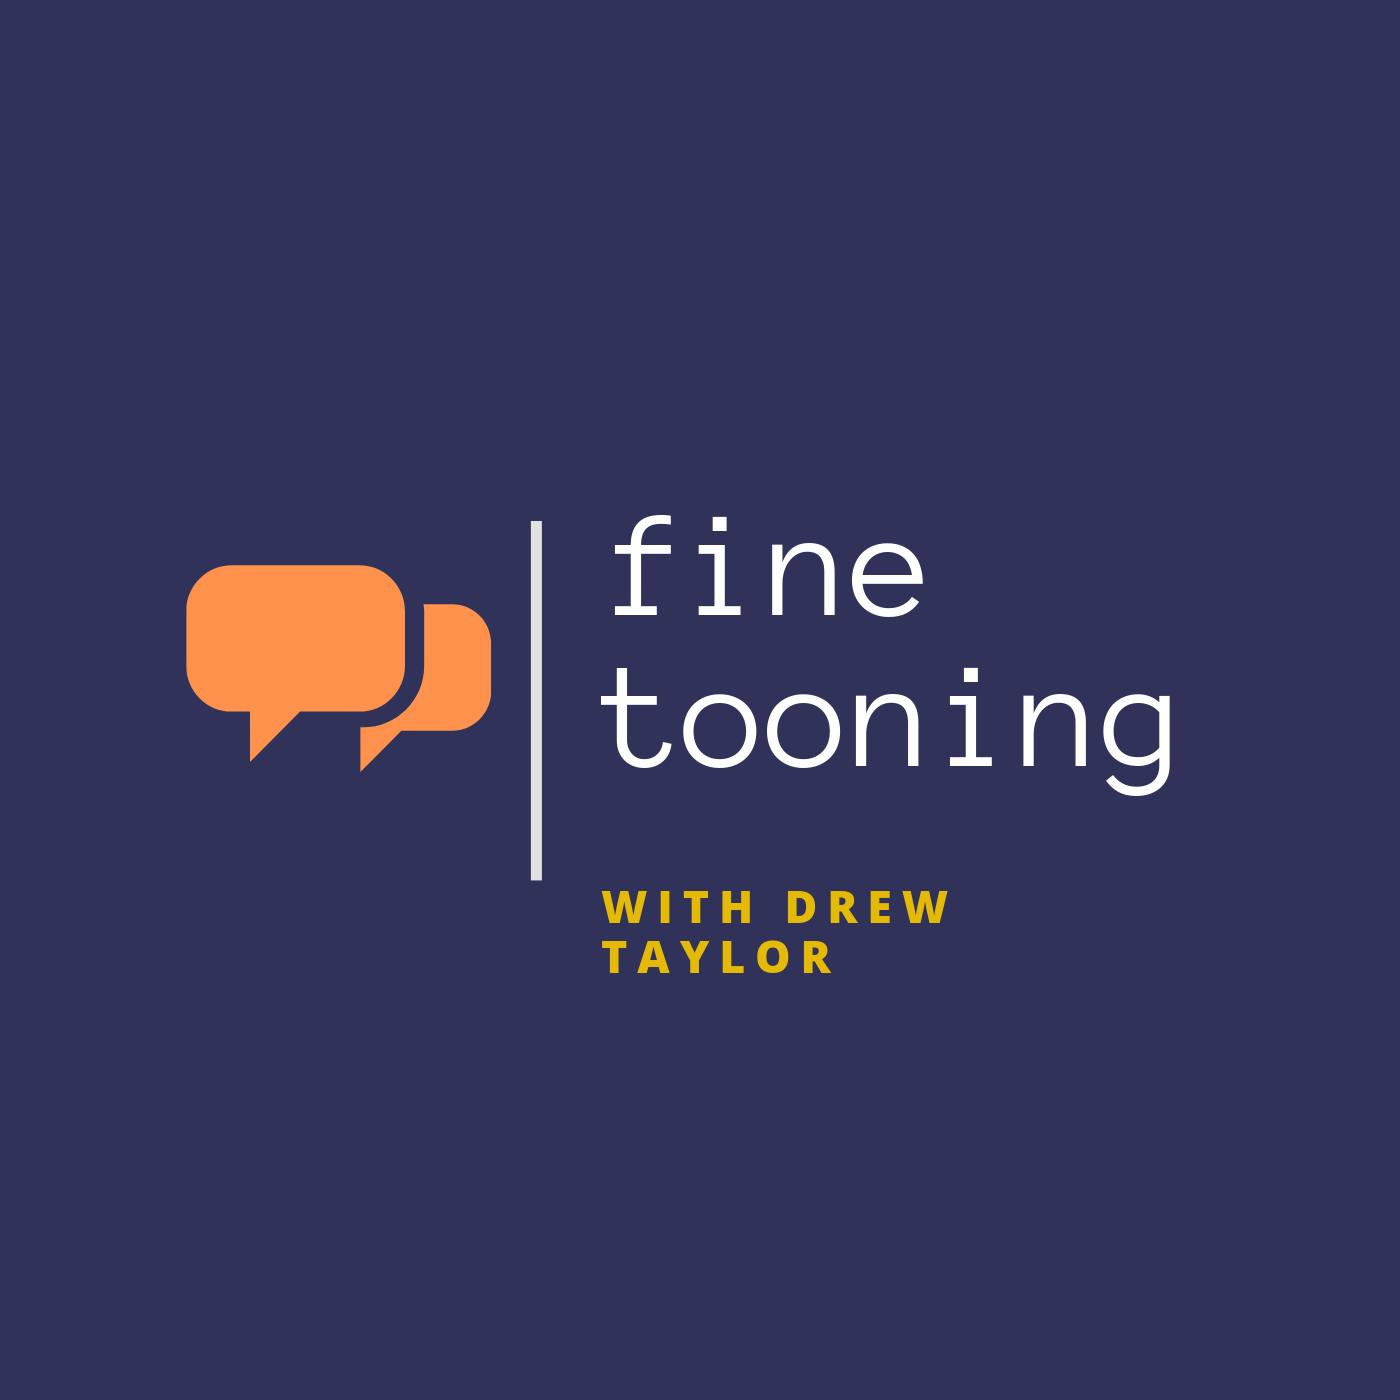 Fine Tooning With Drew Taylor - Episode 237: “Once Upon a Studio” is an artful, heartfelt tribute to Disney Animation